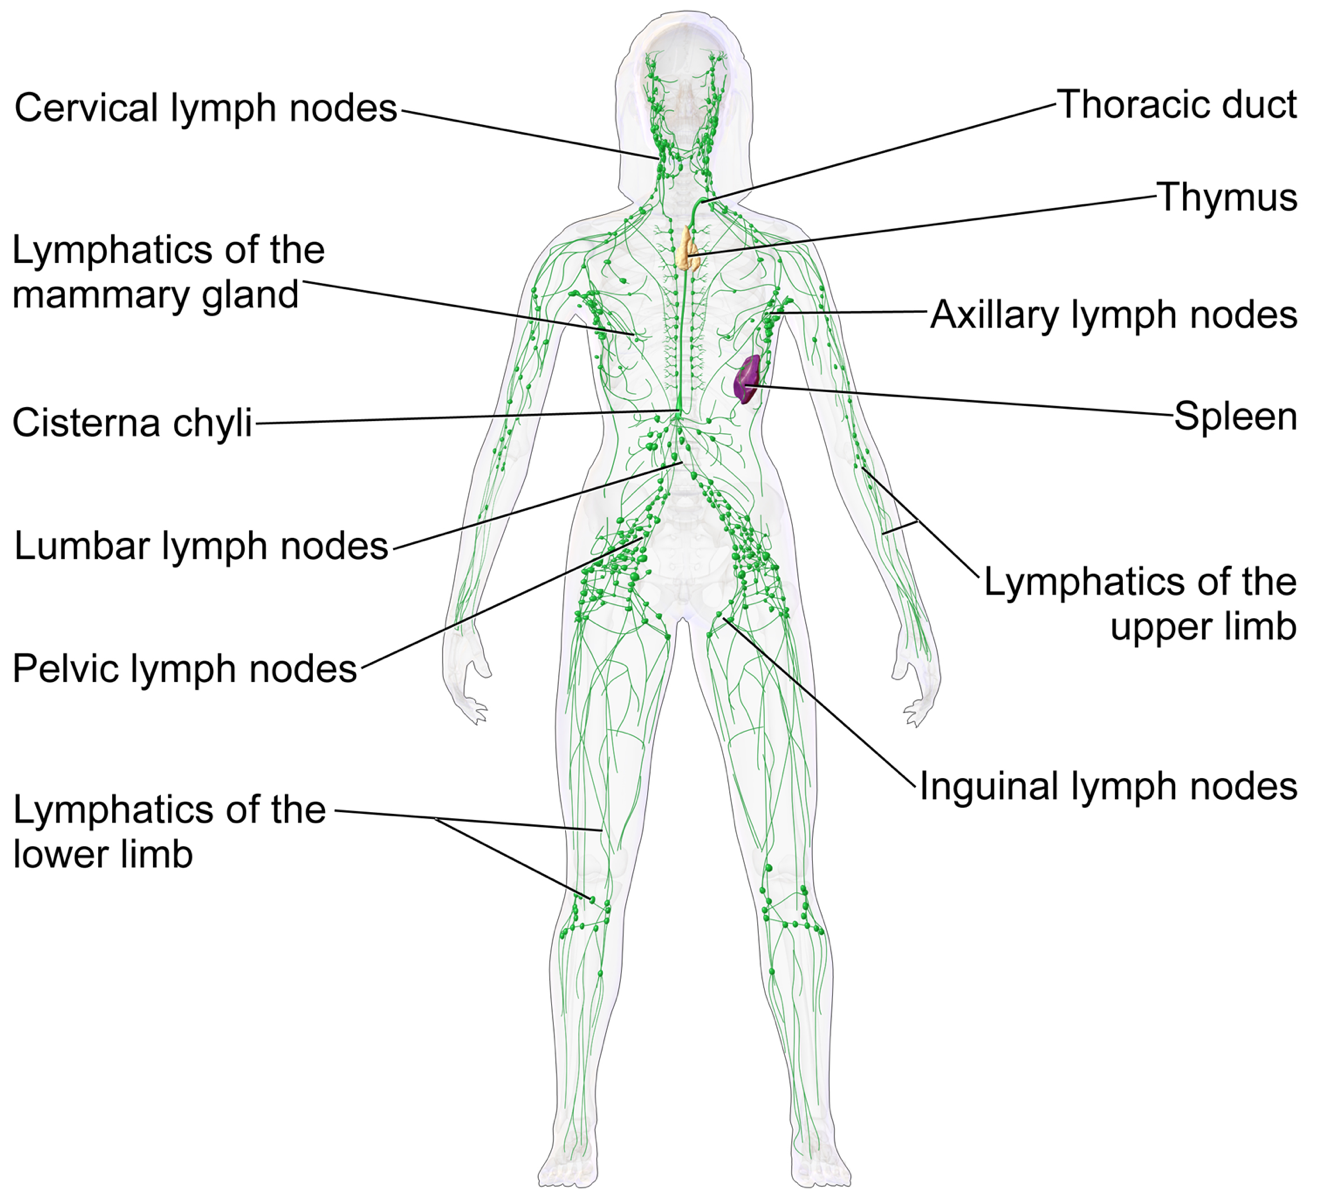 assignment on lymphatic system